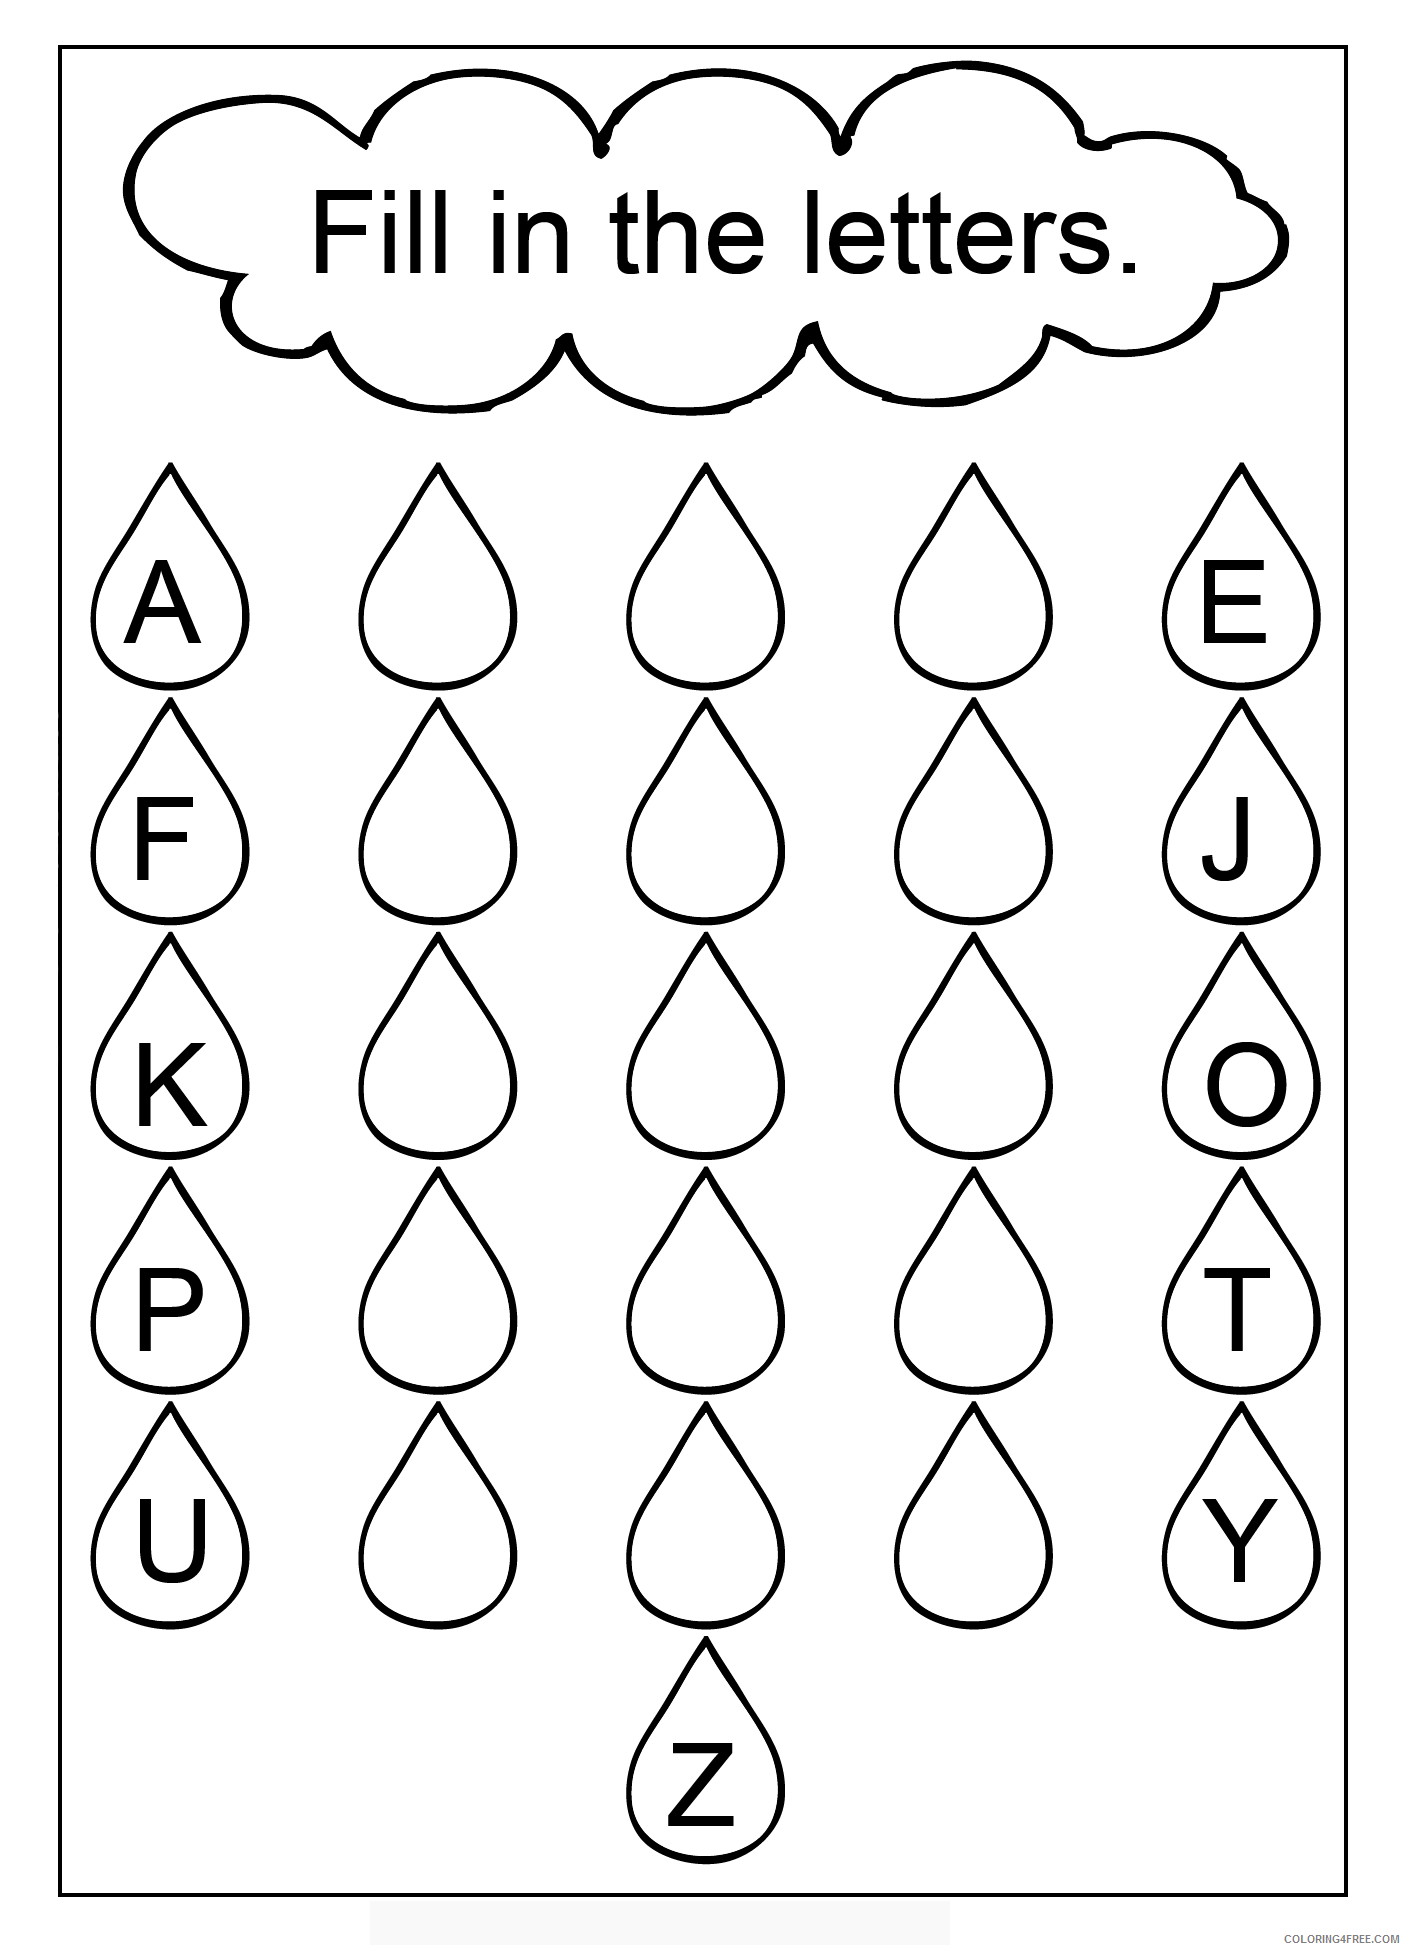 Letter Coloring Pages Educational Fill in Letters Alphabet Printable 2020 1598 Coloring4free